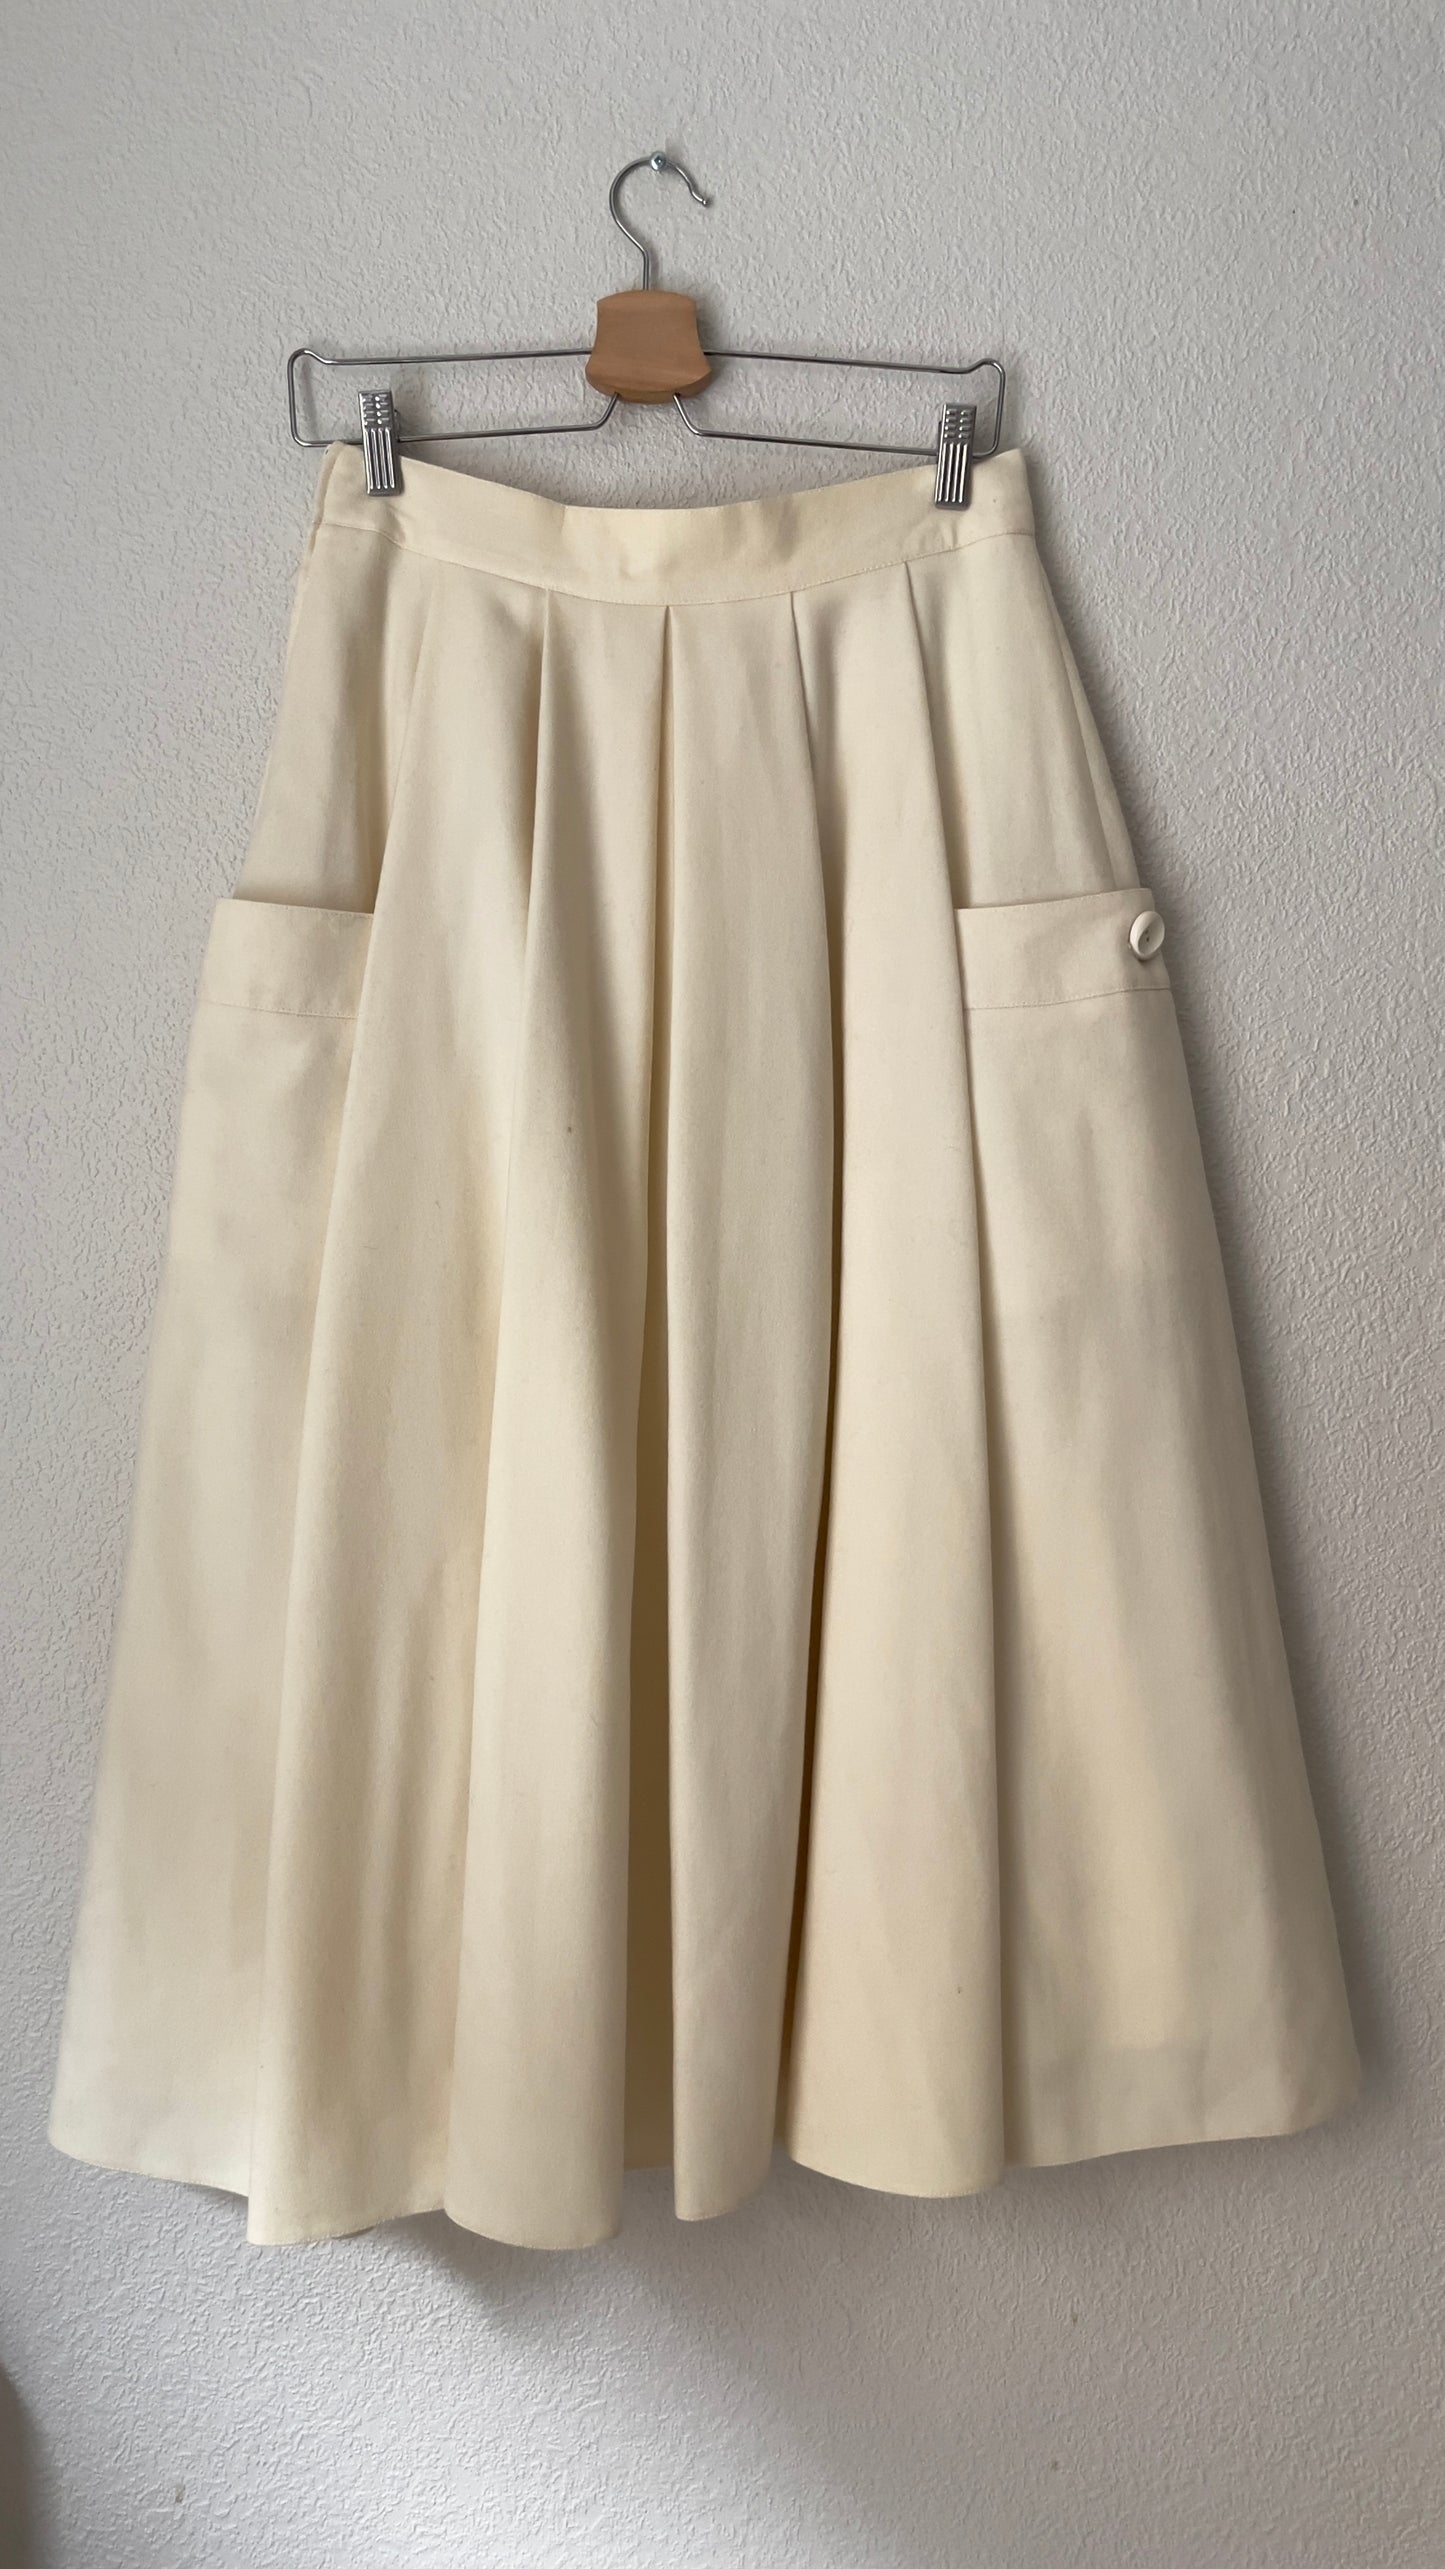 Vintage Pure Wool Skirt - Betty Barclay